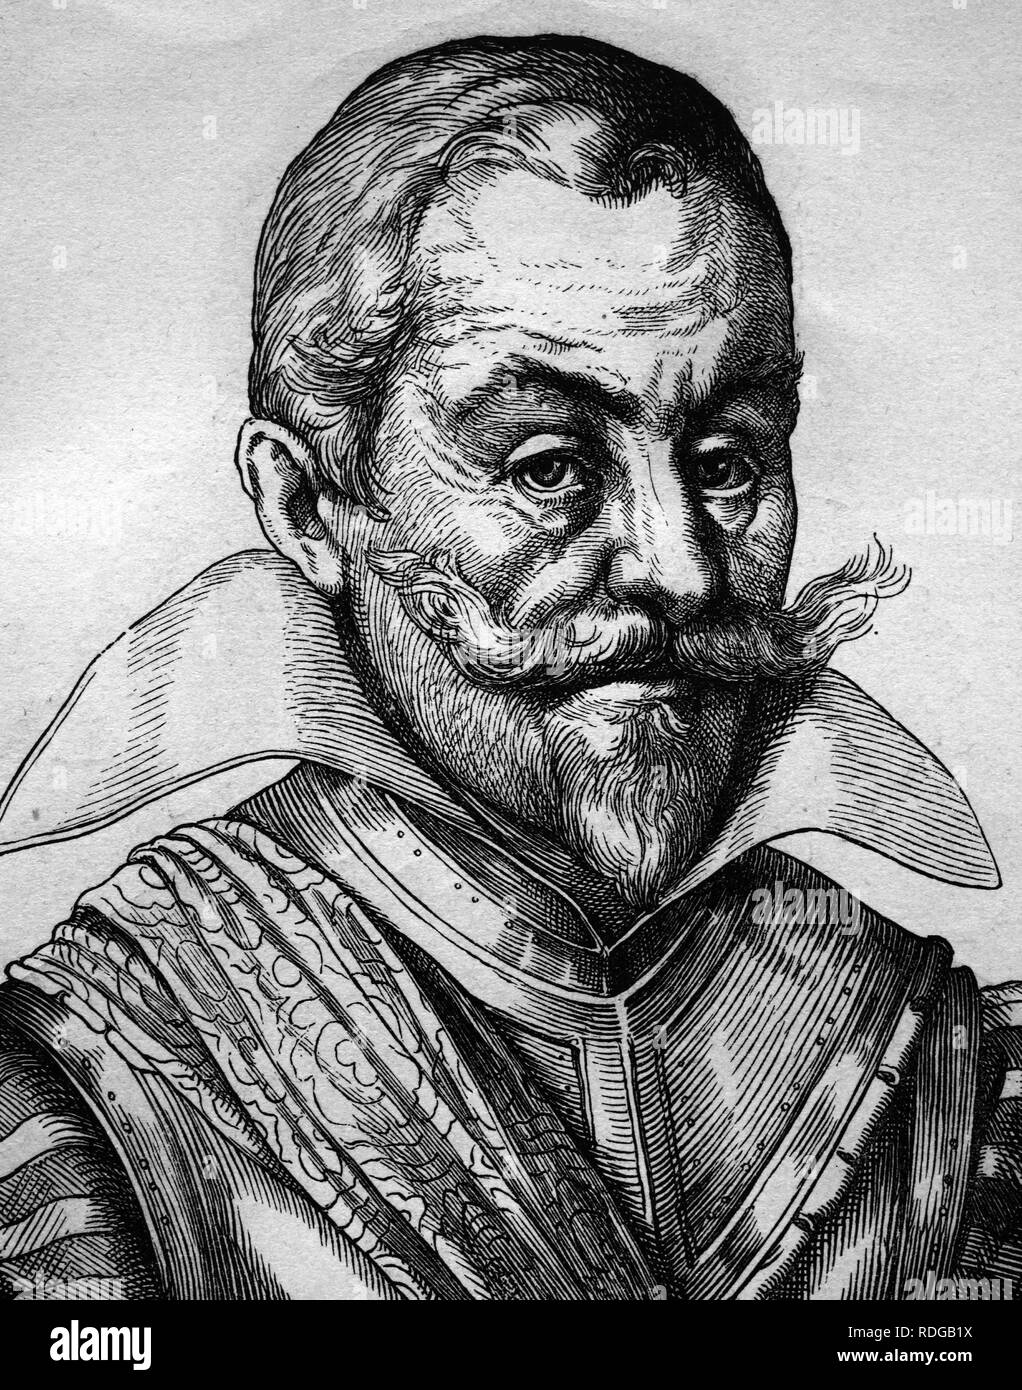 Johann Tserclaes, Count of Tilly, commander of the Catholic League in the Thirty Years' War, 1559 - 1632 Stock Photo